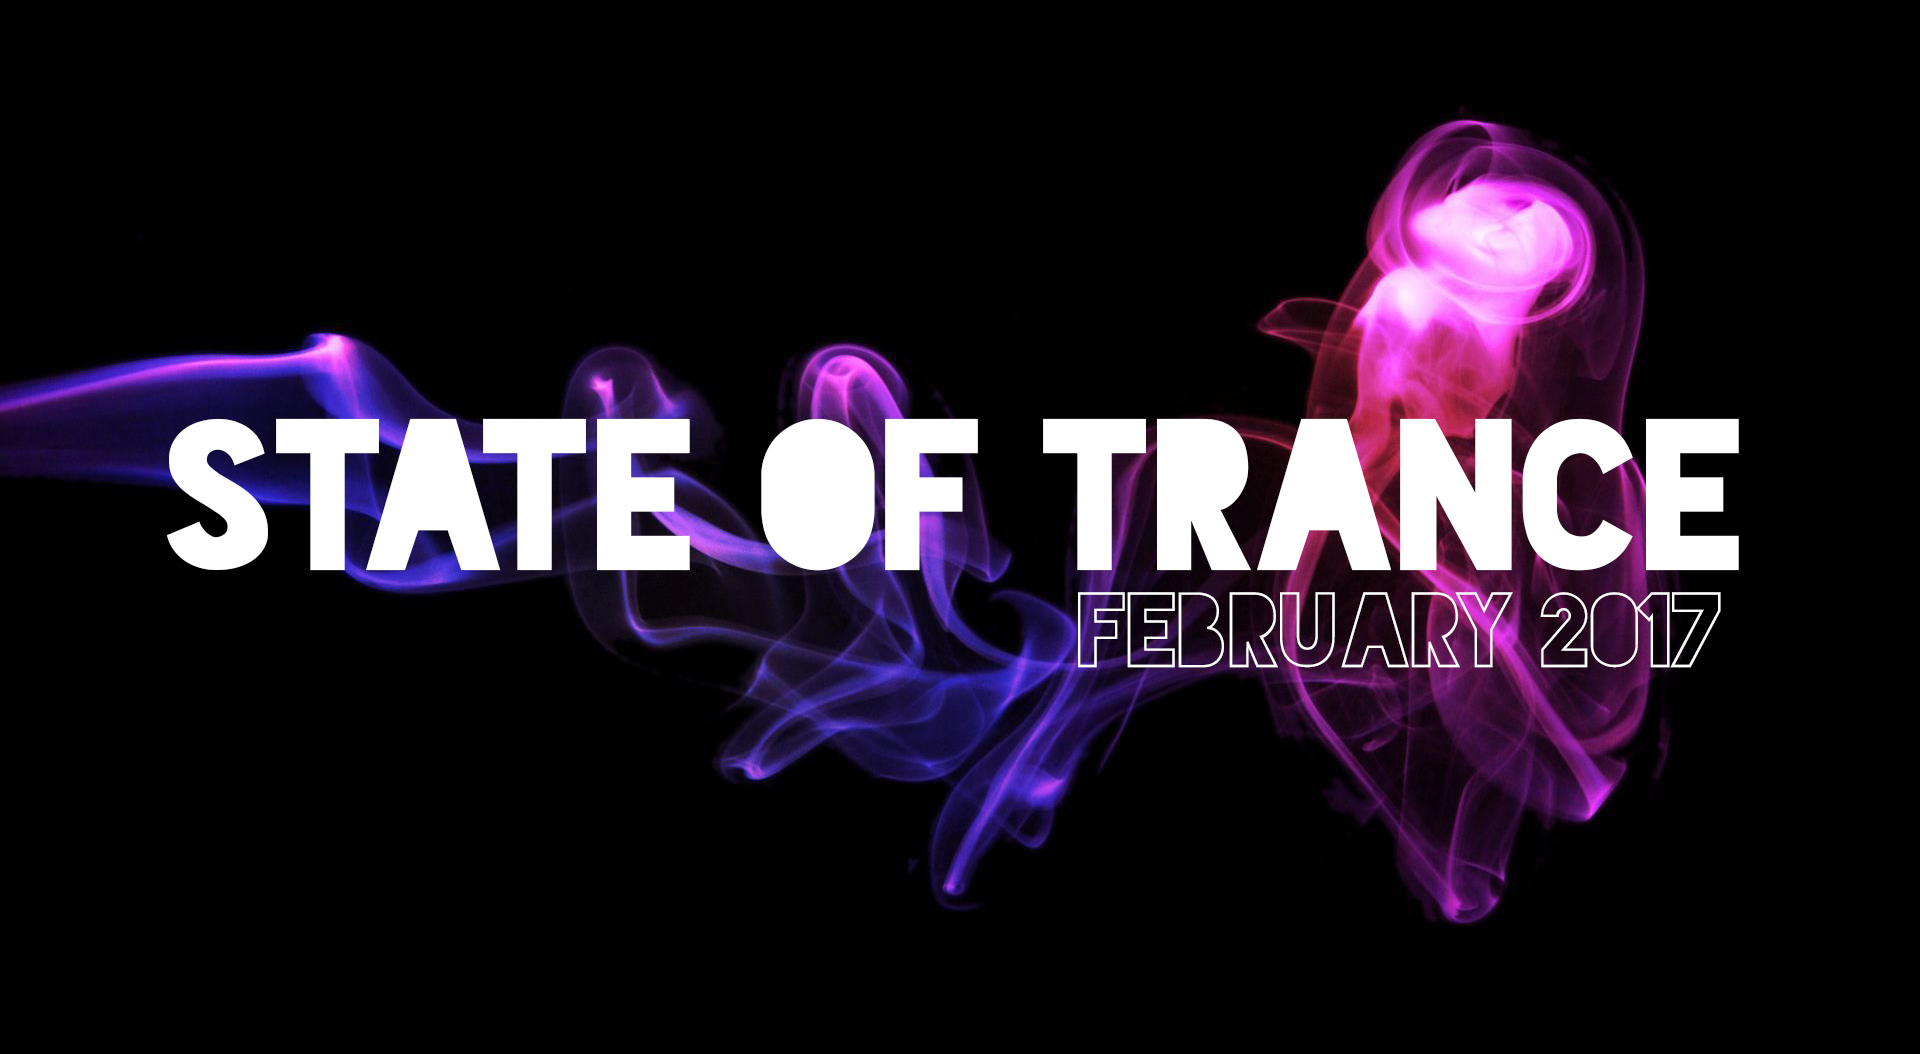 [TRANCE] Here Are The Top 10 Trance Tracks For February 2017